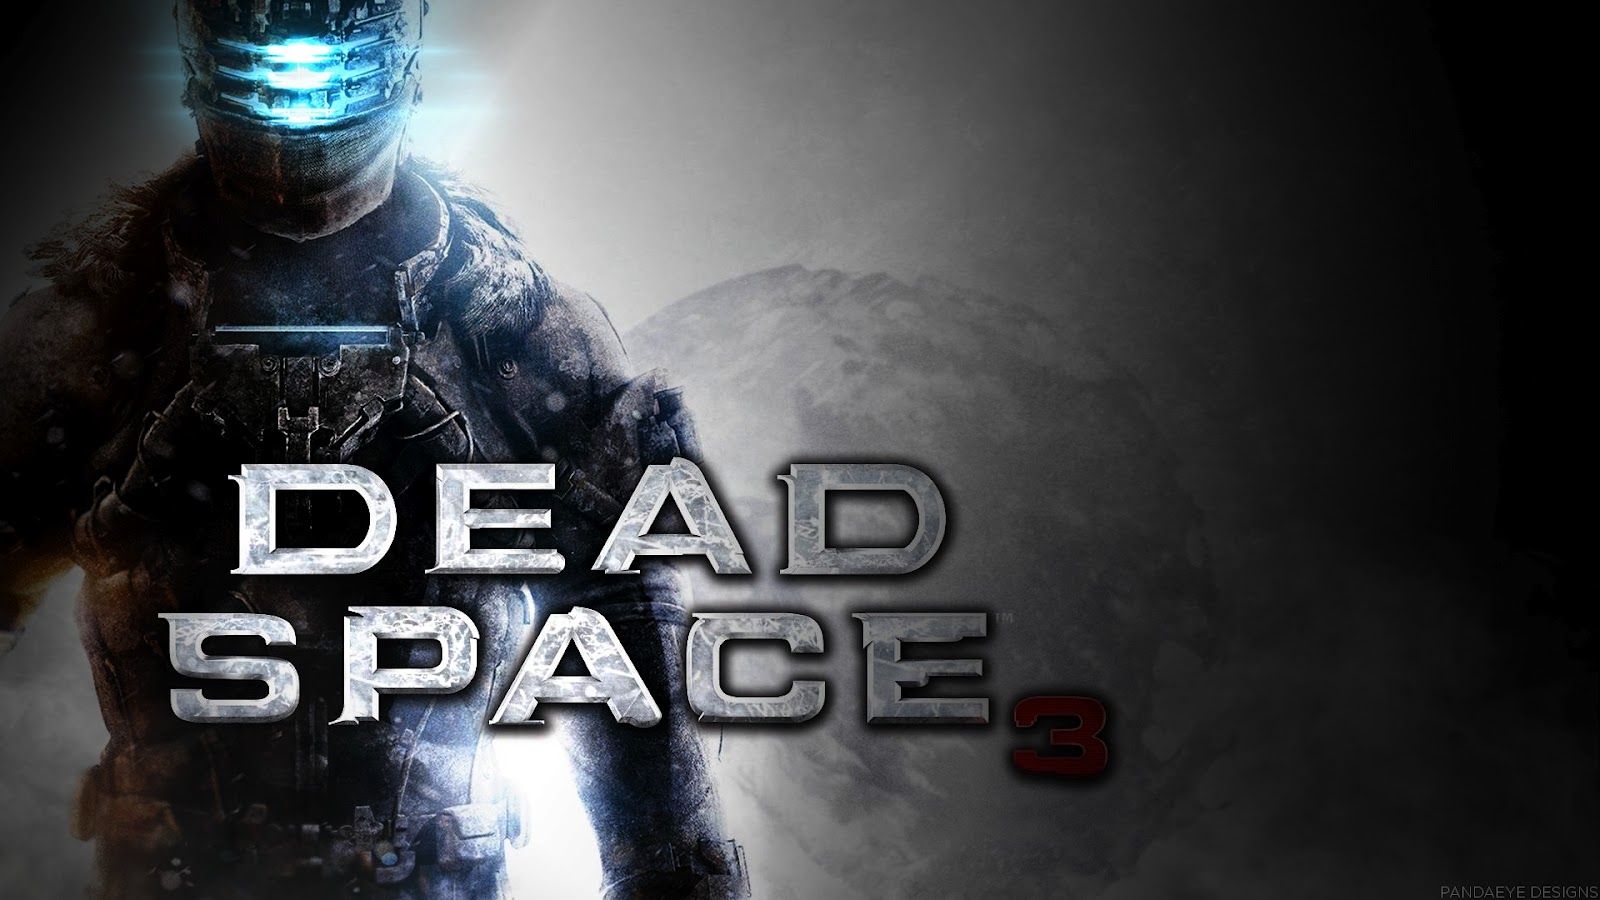 dead space wallpaper hd,action adventure game,pc game,fictional character,movie,games